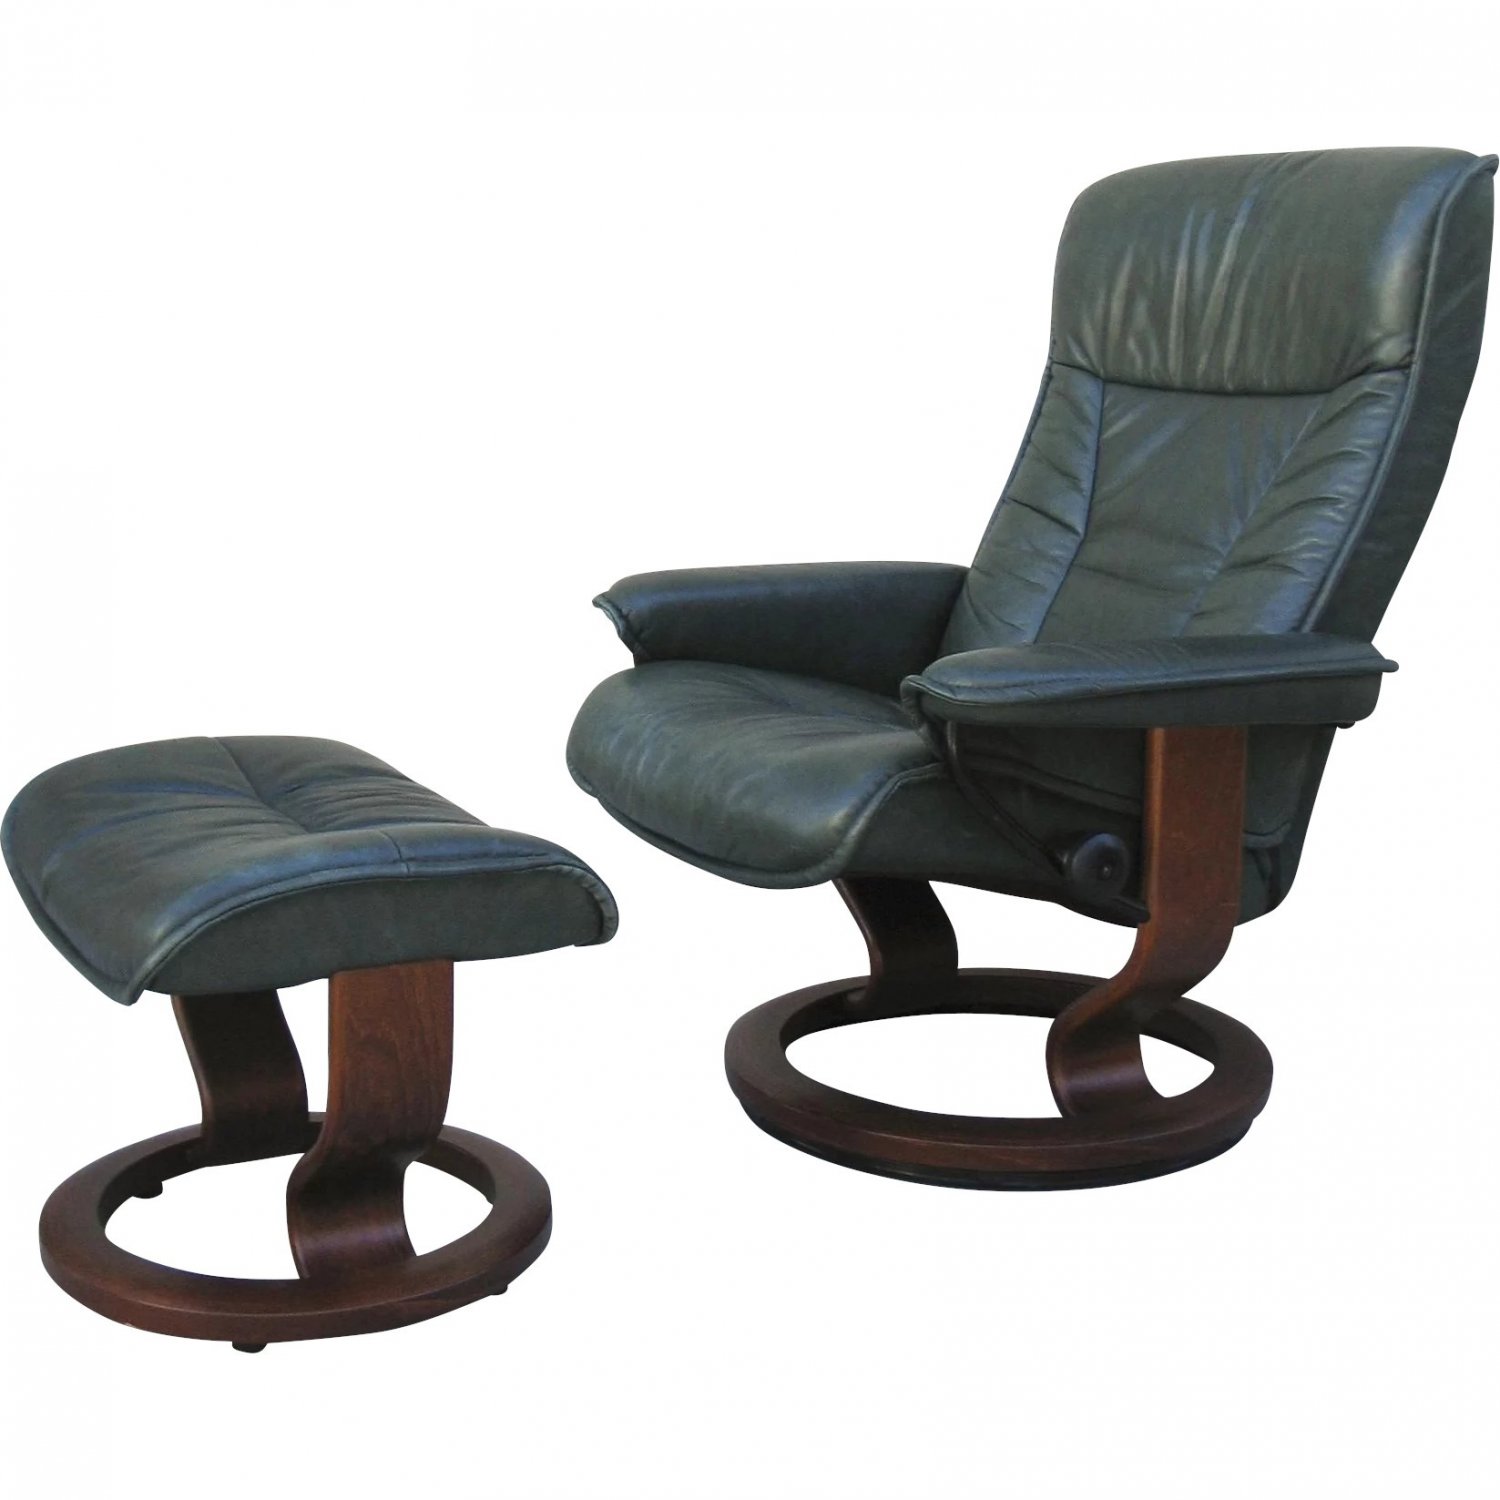 Vintage-Leather-Green-Stressless-Chair-Ottoman-pic-1A-2048-69-f.jpg